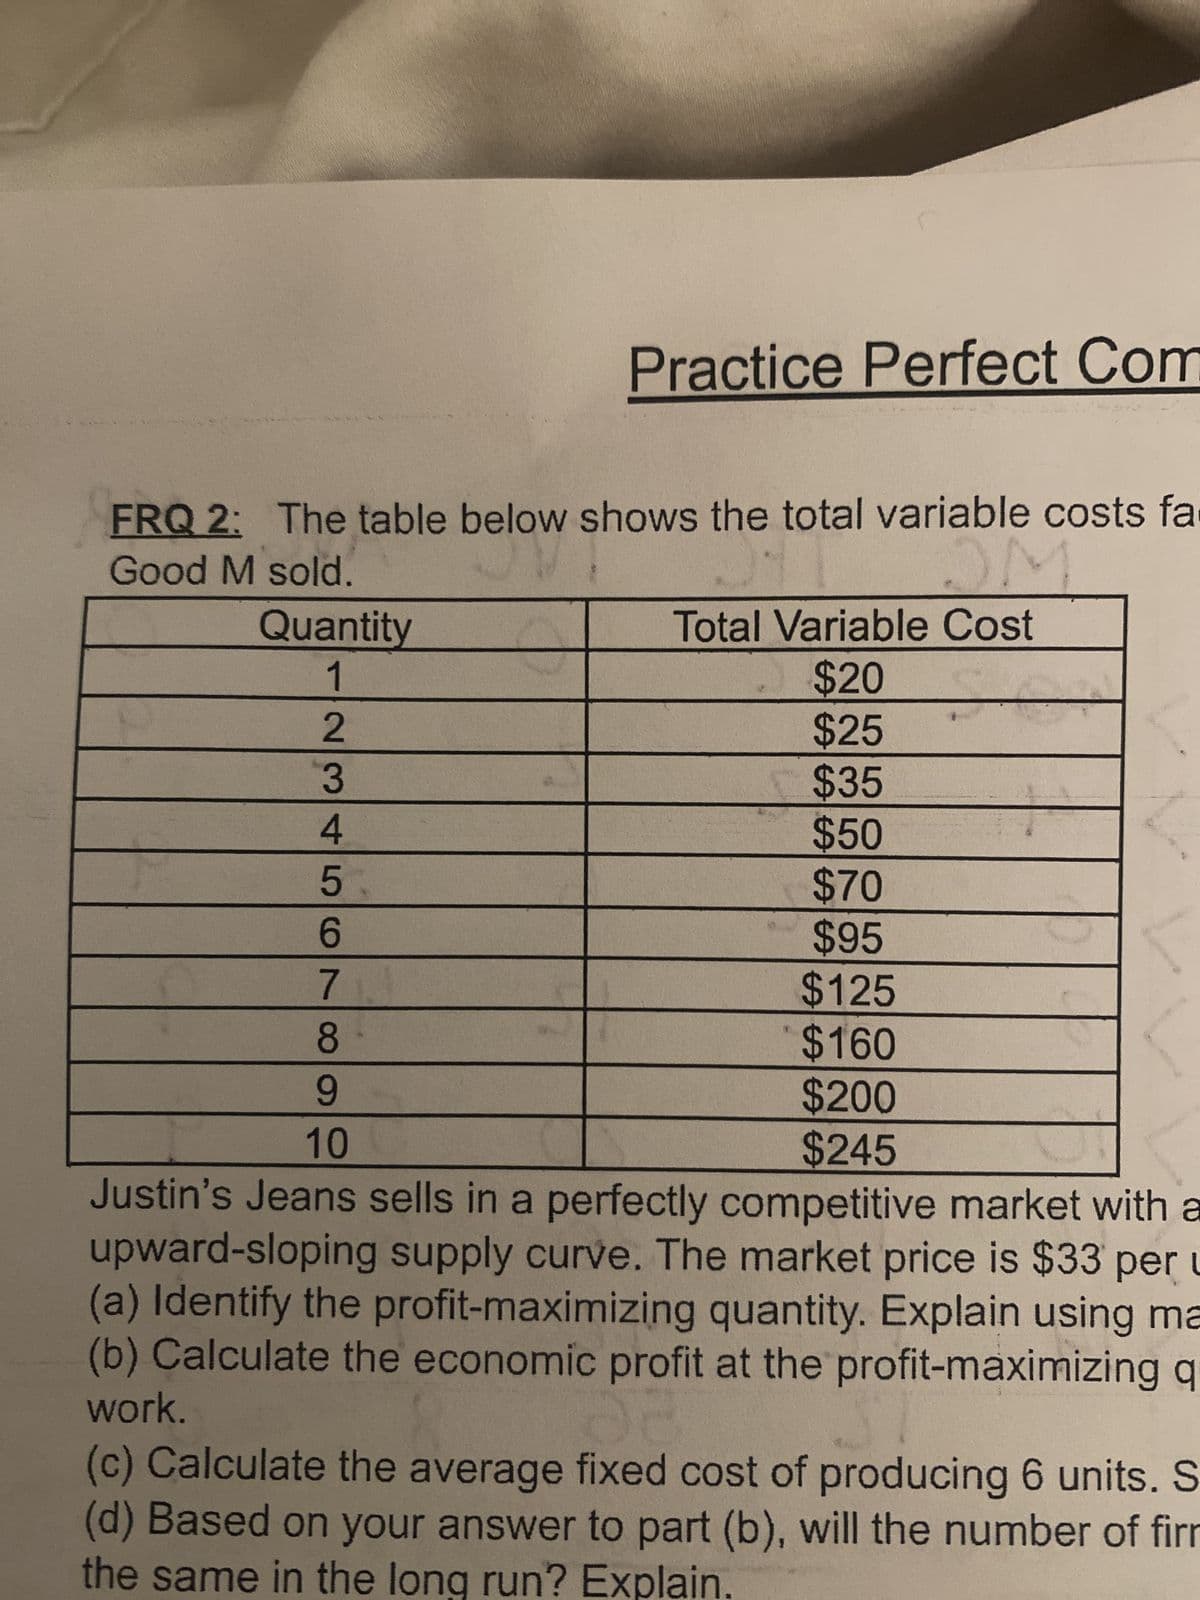 Good M sold.
OVI
FRQ 2: The table below shows the total variable costs fa
-
Quantity
1
Practice Perfect Com
234567
ON
Total Variable Cost
$20
$25
$35
$50
$70
$95
$125
$160
$200
$245
14
8
9
10
Justin's Jeans sells in a perfectly competitive market with a
upward-sloping supply curve. The market price is $33 per u
(a) Identify the profit-maximizing quantity. Explain using ma
(b) Calculate the economic profit at the profit-maximizing q
work.
(c) Calculate the average fixed cost of producing 6 units. S
(d) Based on your answer to part (b), will the number of firm
the same in the long run? Explain.